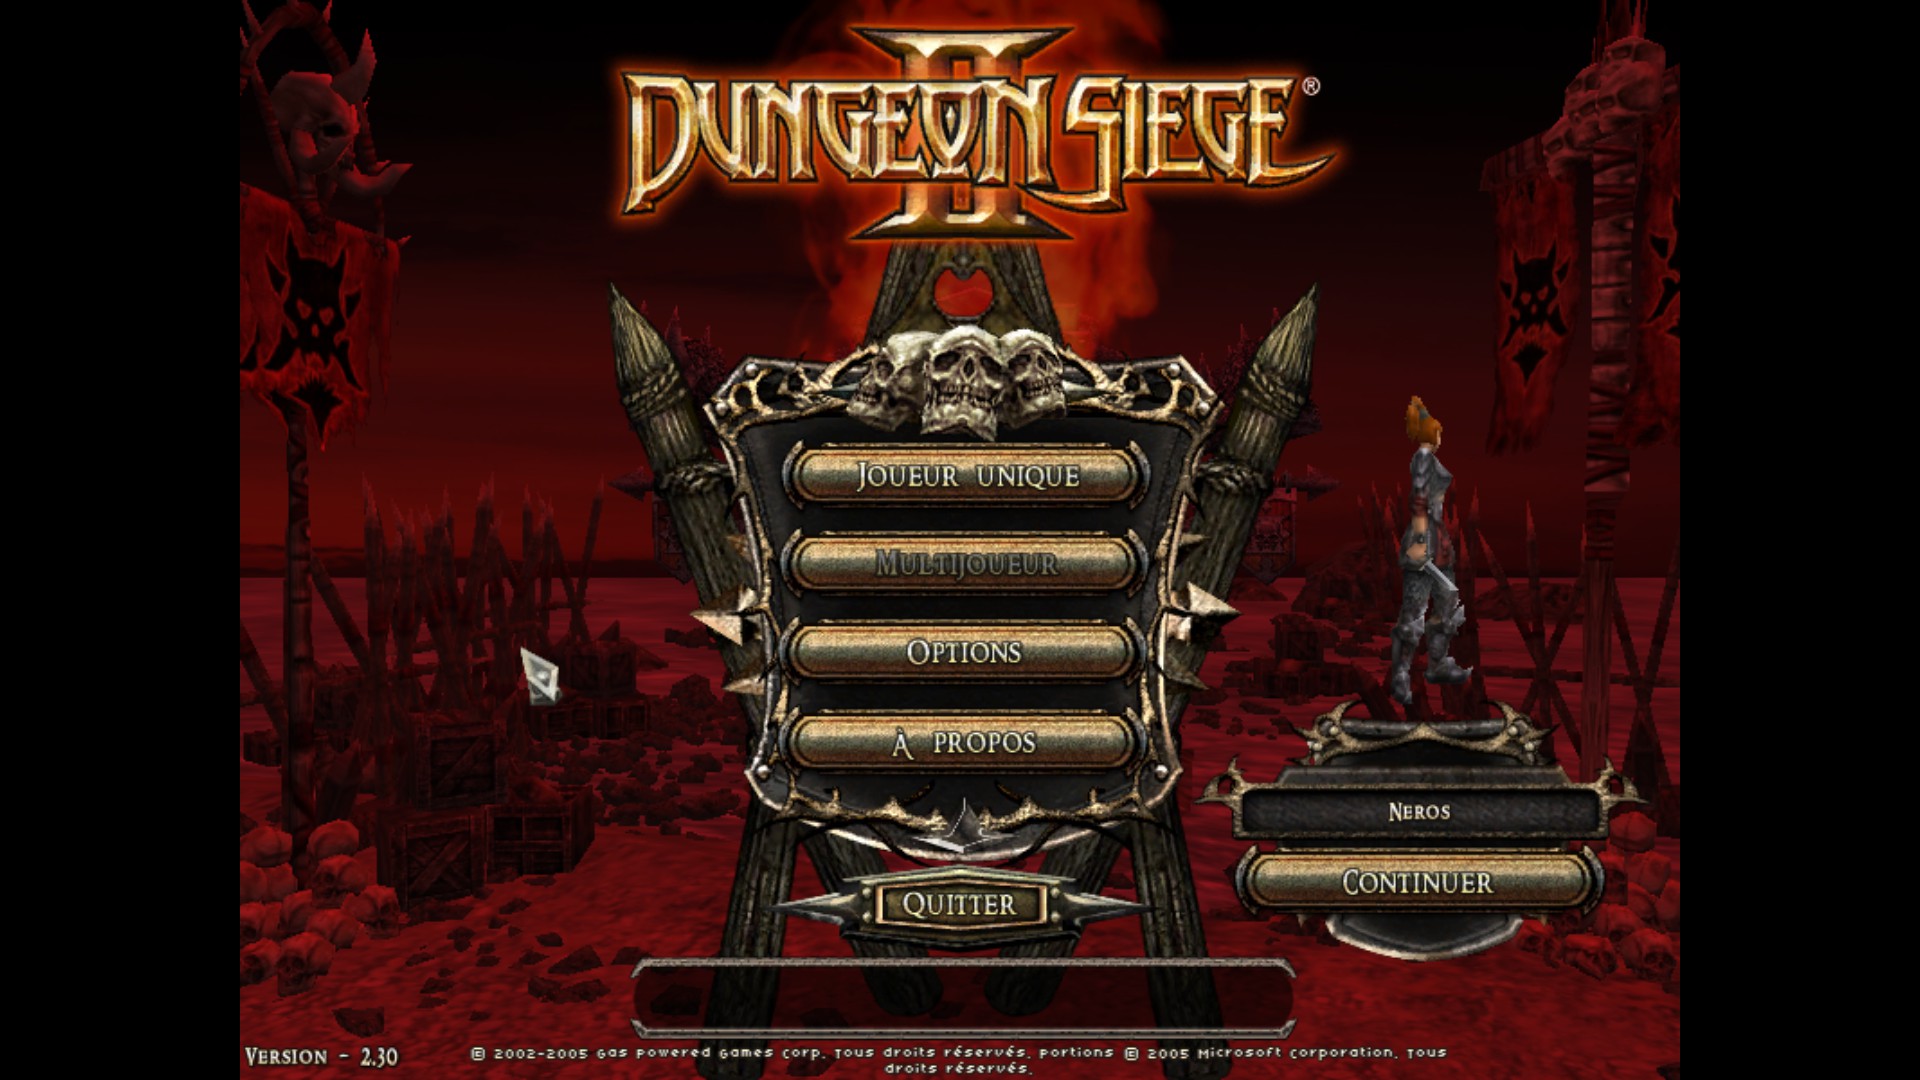 Dungeon siege 2 no mouse